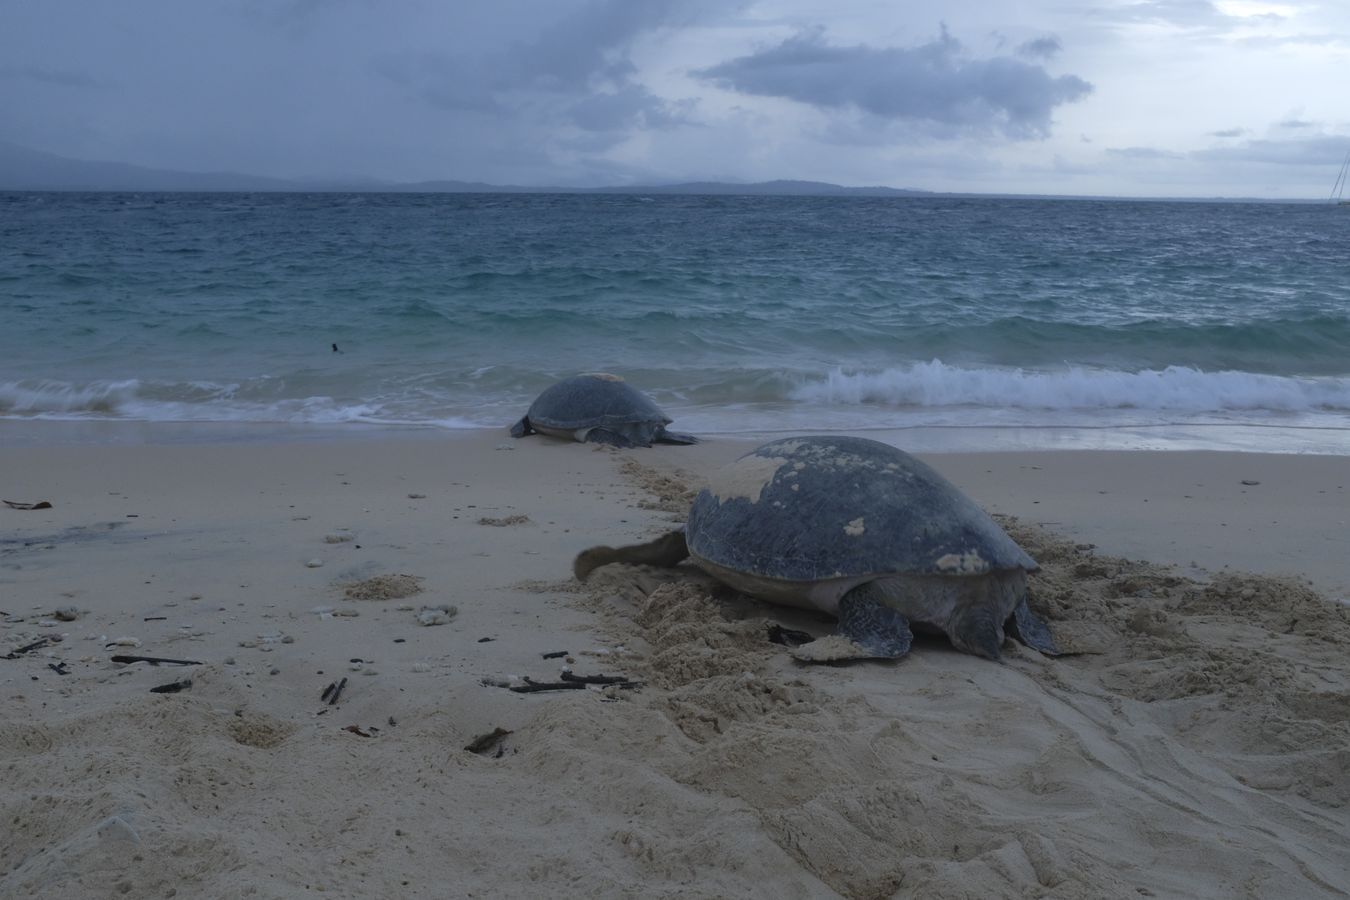 Two green turtles return to the ocean after having deposited their eggs in their nest in the sand on the beach.